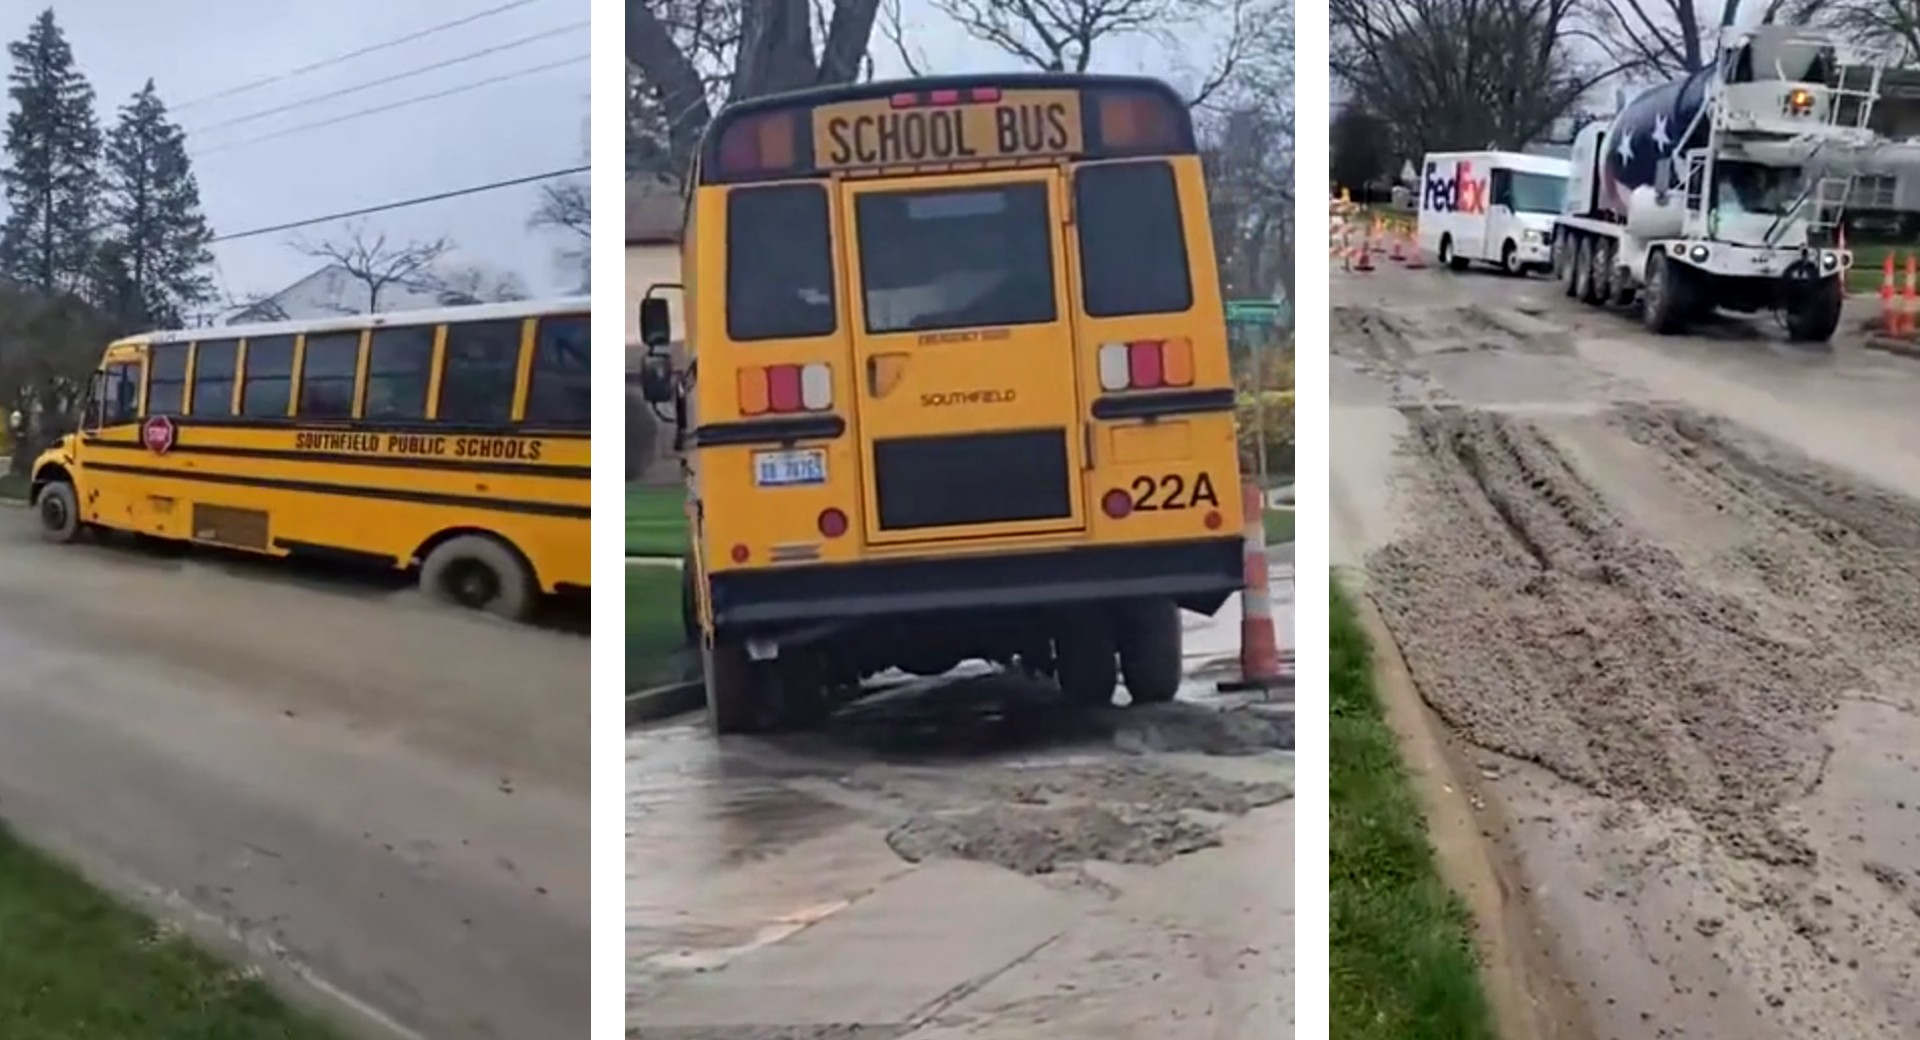 Construction workers were not happy about the mess left behind by the school bus driver